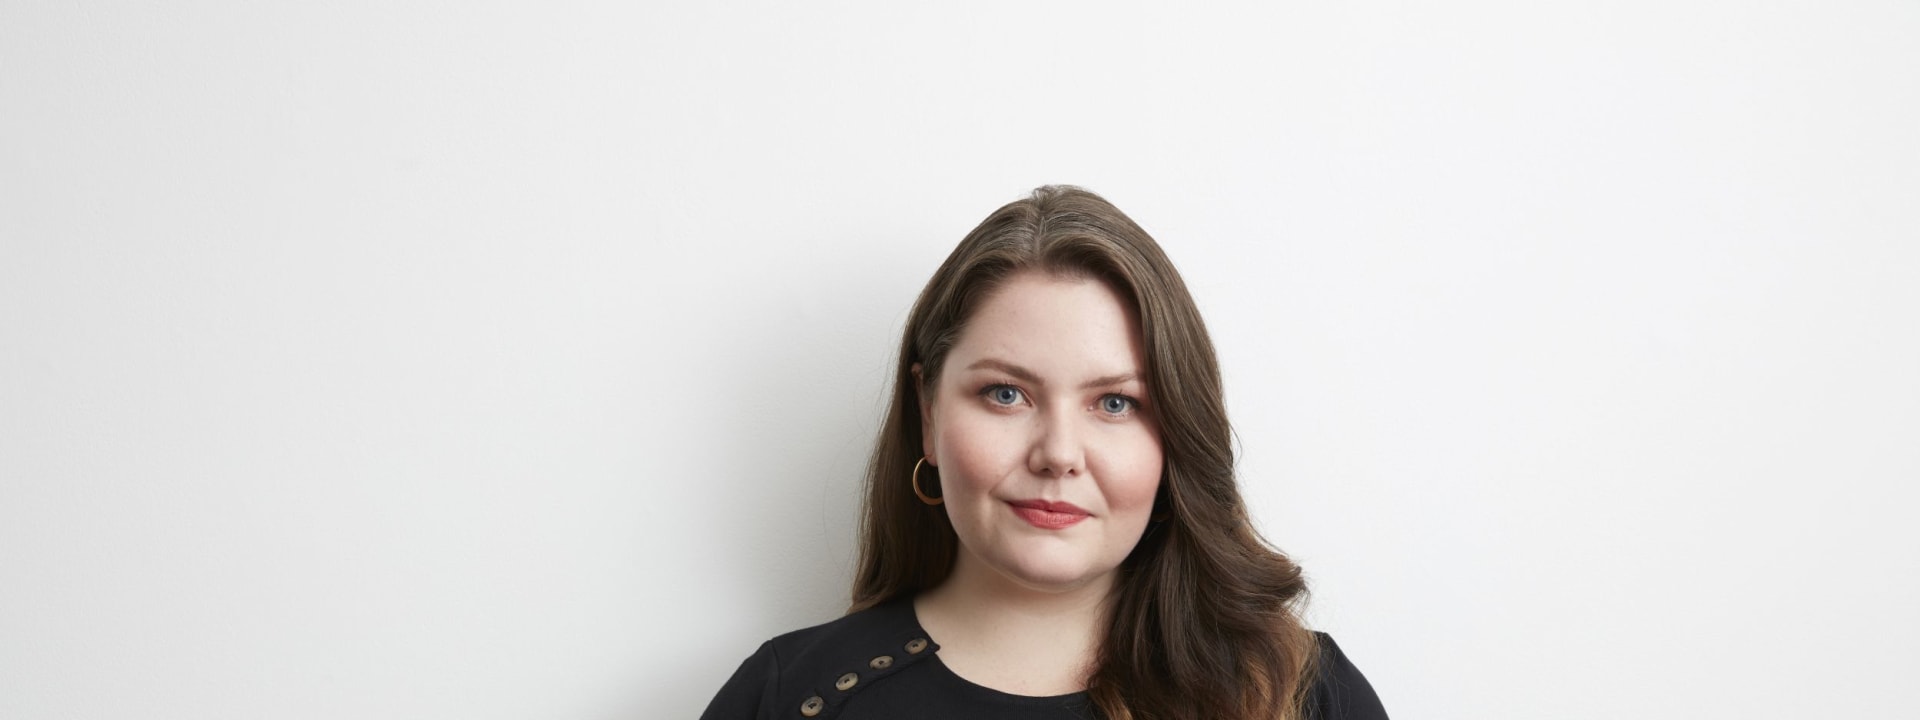 Brand X appoints new General Manager Emmaly Langridge